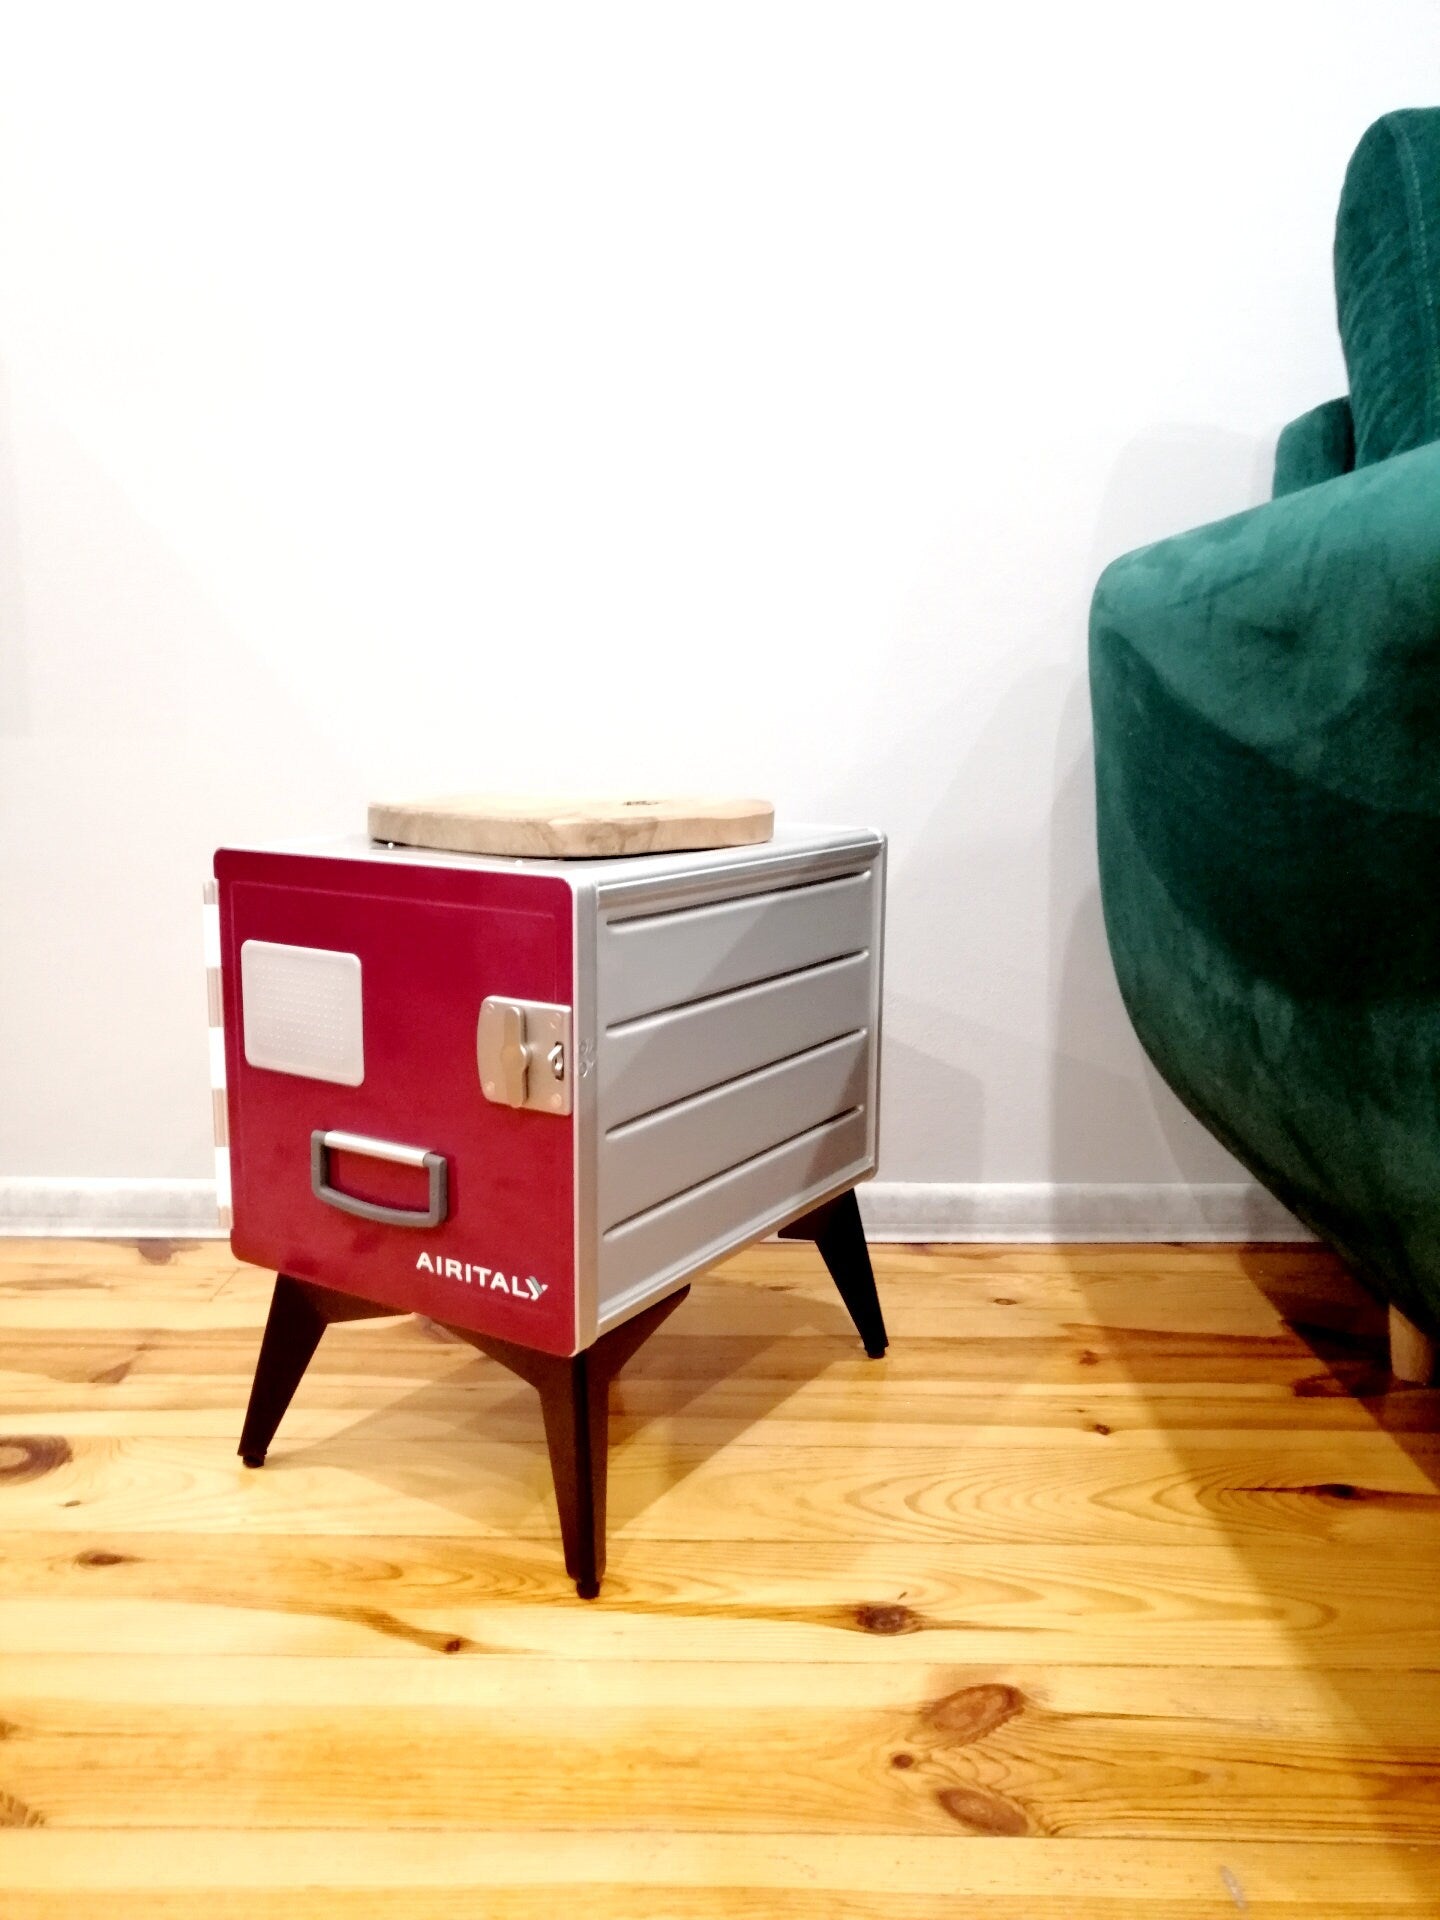 Brand New Air Italy Airline Galley Storage Box as Side Table, Storage Cabinet, Aviation Design